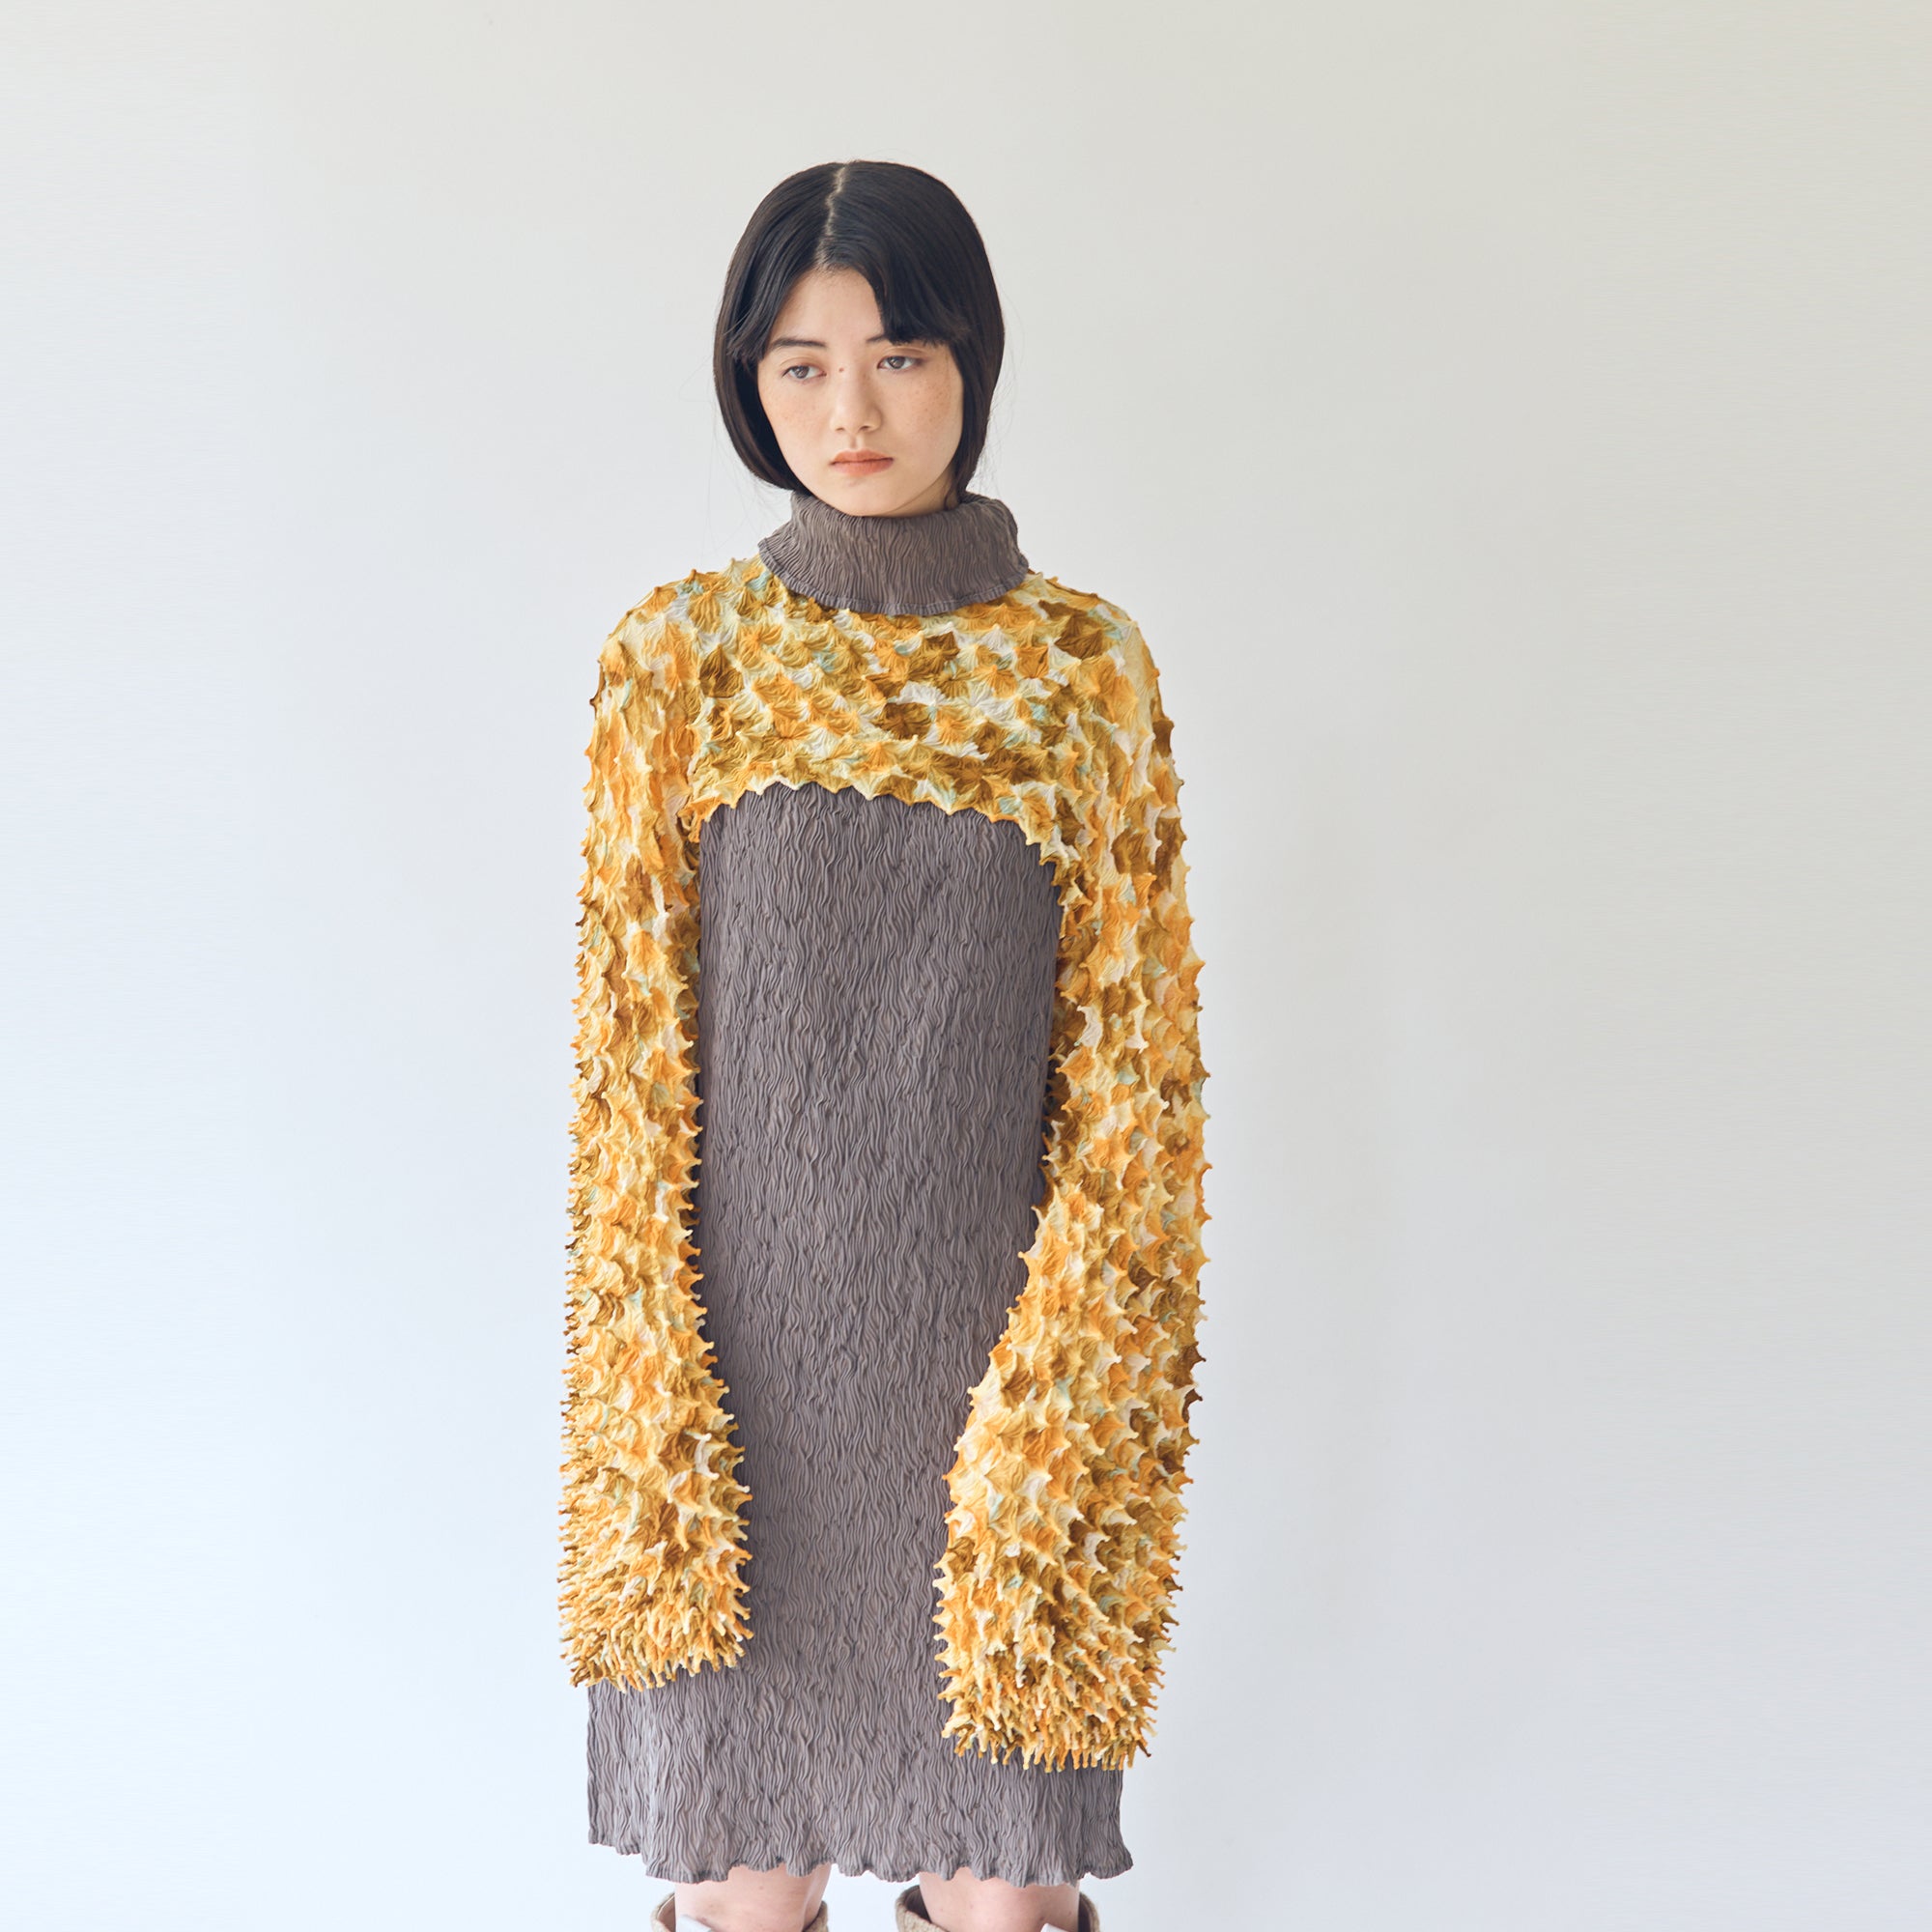 Spiky Shibori Super Crop Top with Bell Sleeves - Unevenly Dyed Chiffon